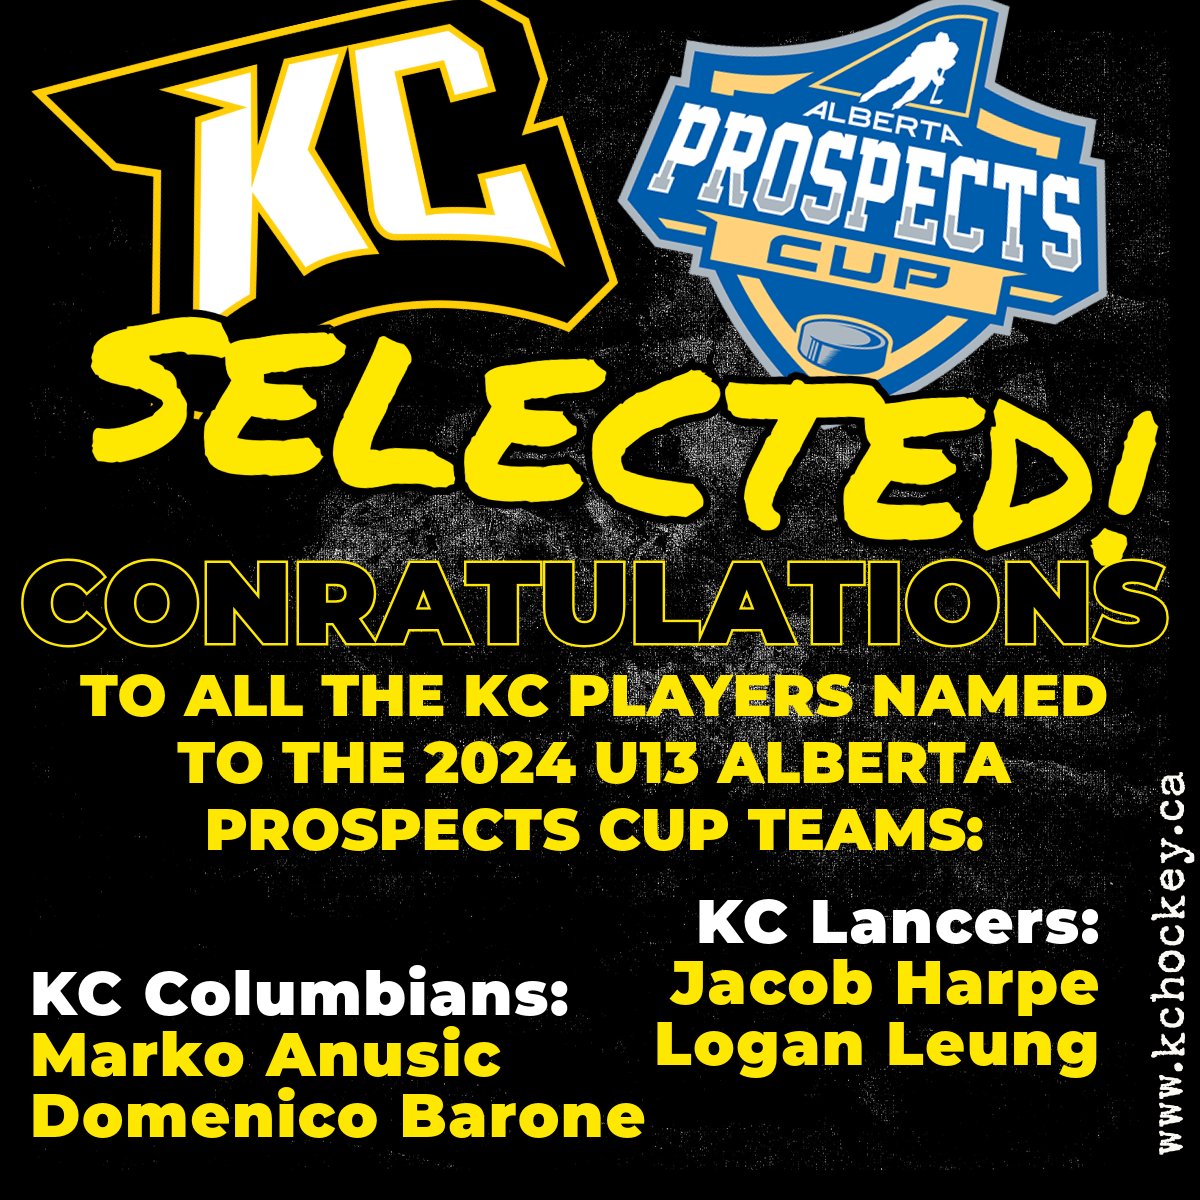 This year KC will again be very well represented at the Alberta Prospects Cup where the top second-year U13 athletes will hit the ice in Red Deer for a tournament in mid-May. Congratulations to Marko Anusic, Domenico Barone, Jacob Harpe, and Logan Leung!